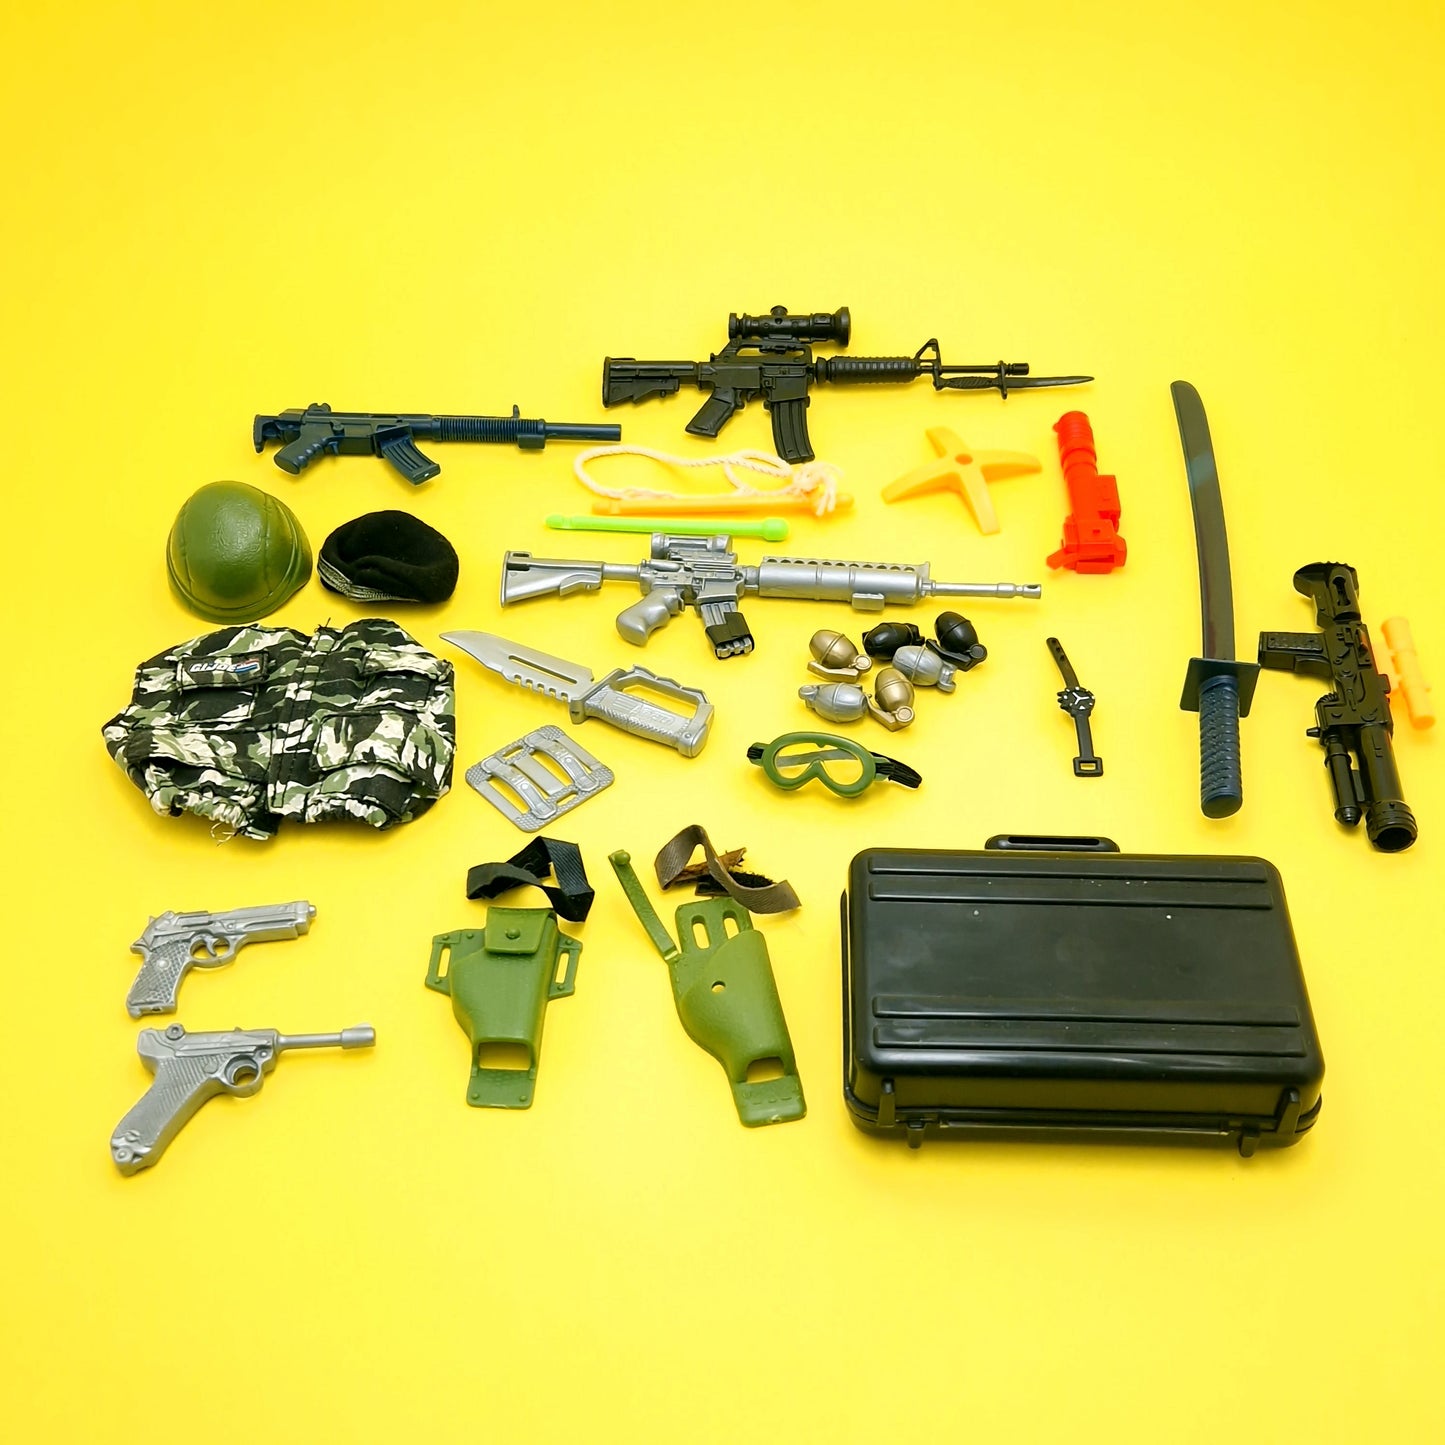 ACTION MAN ☆ ASSUALT GEAR PACK Accessories Near Complete ☆ Vintage HASBRO 90's Loose